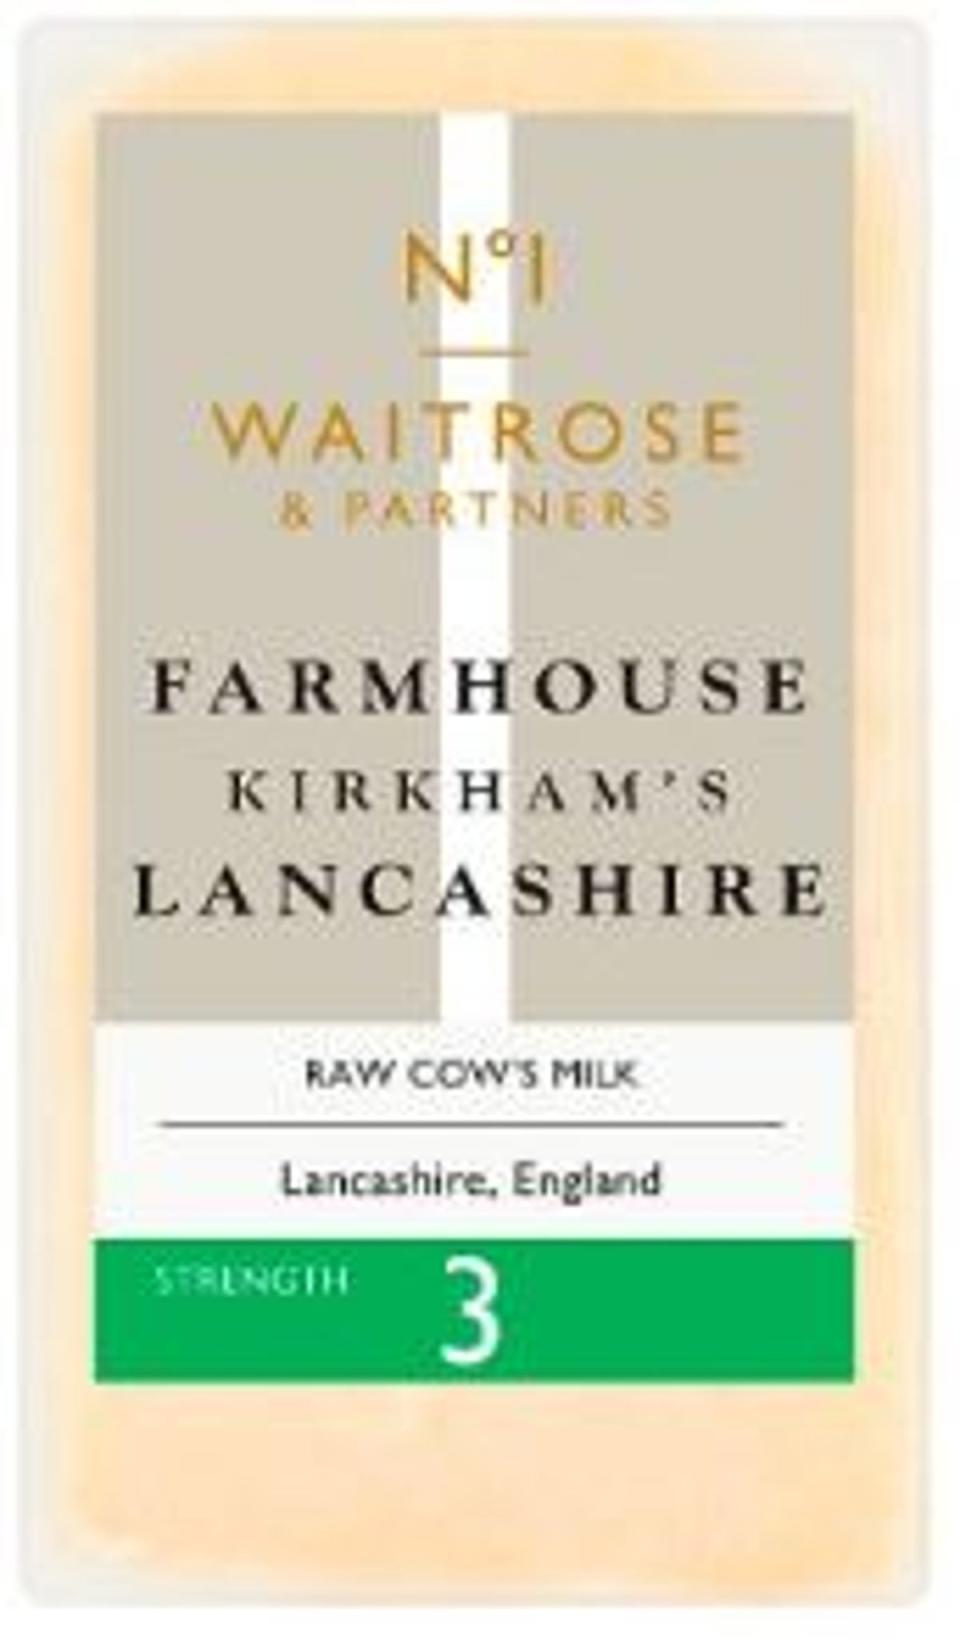 The cheese in question (Waitrose)